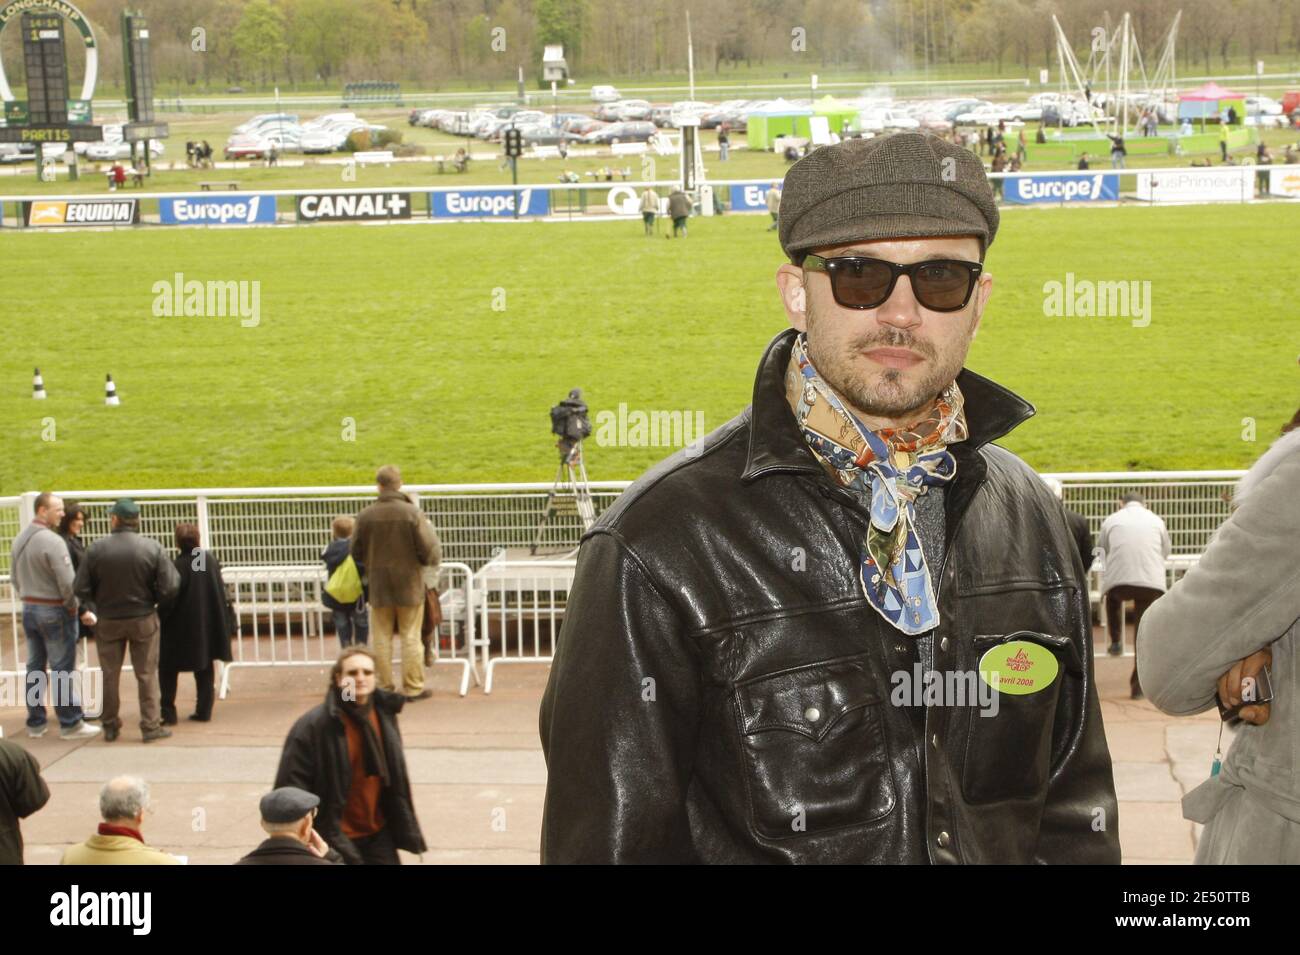 Swiss actor Vincent Perez attends the 'Dimanches de France Galop' exhibition at the Longchamp horse track in Paris, France, on April 6, 2008. Photo by Thierry Orban/ABACAPRESS.COM Stock Photo